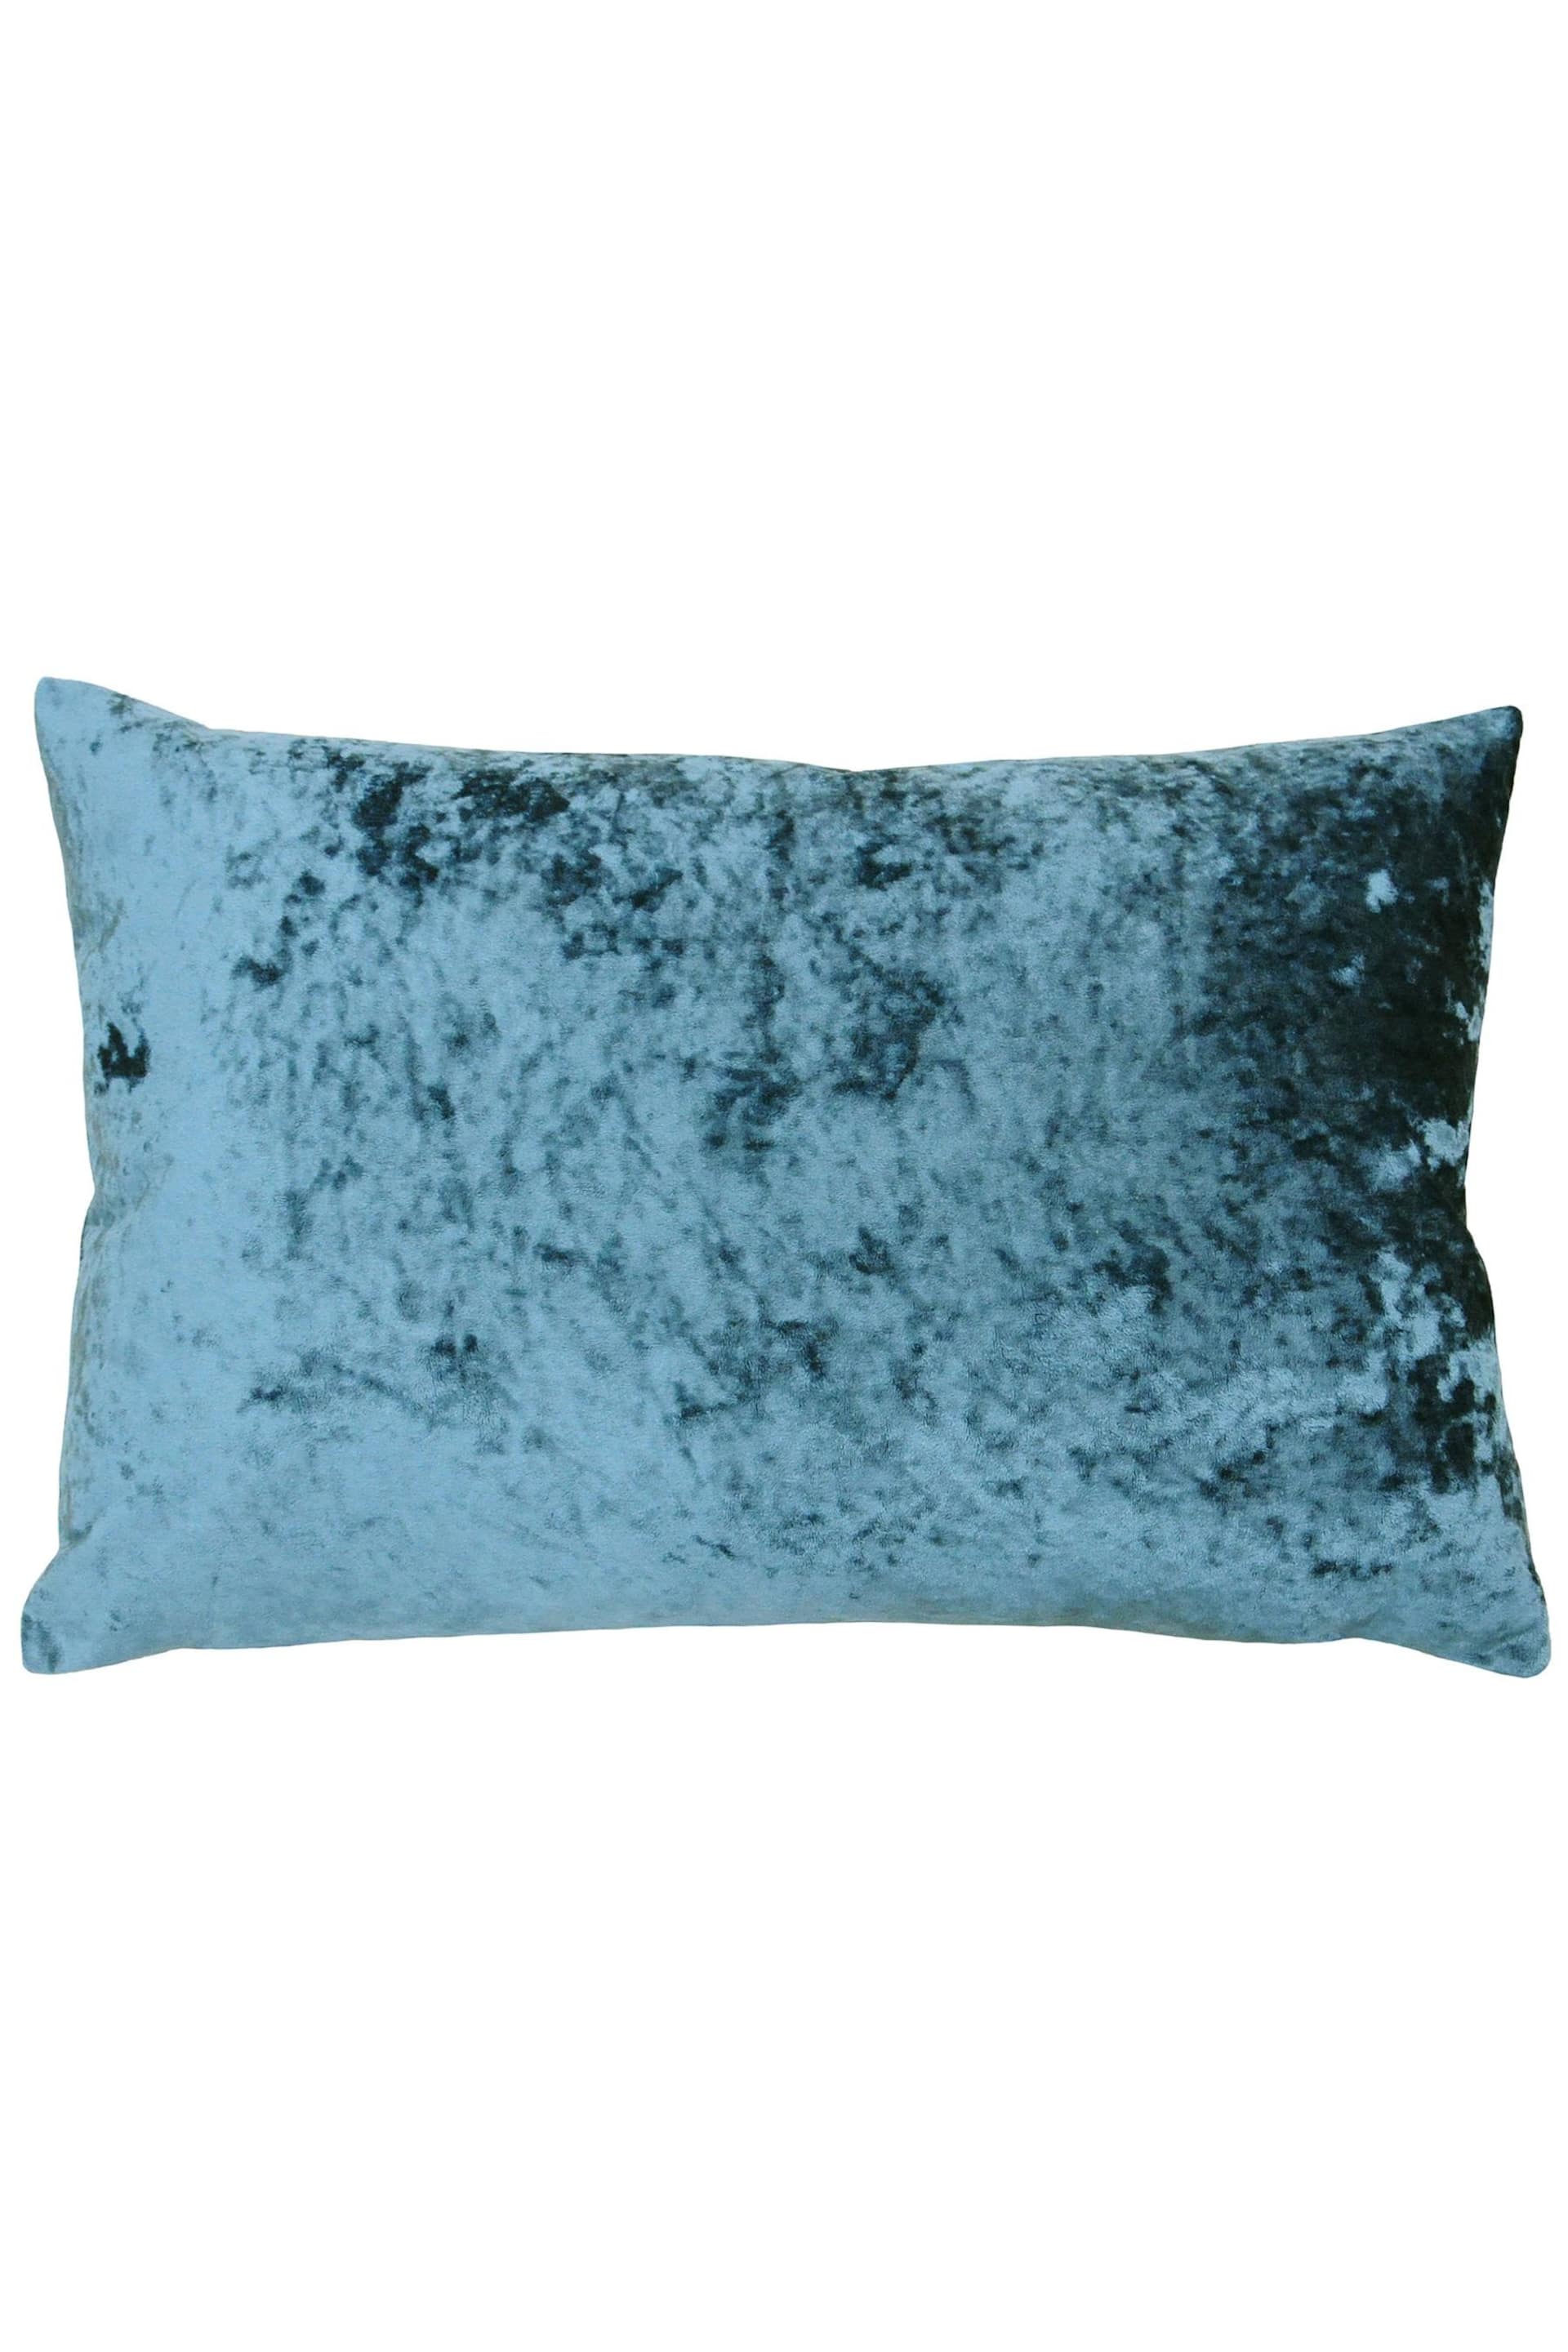 Riva Paoletti Teal Blue Verona Crushed Velvet Rectangular Polyester Filled Cushion - Image 1 of 2